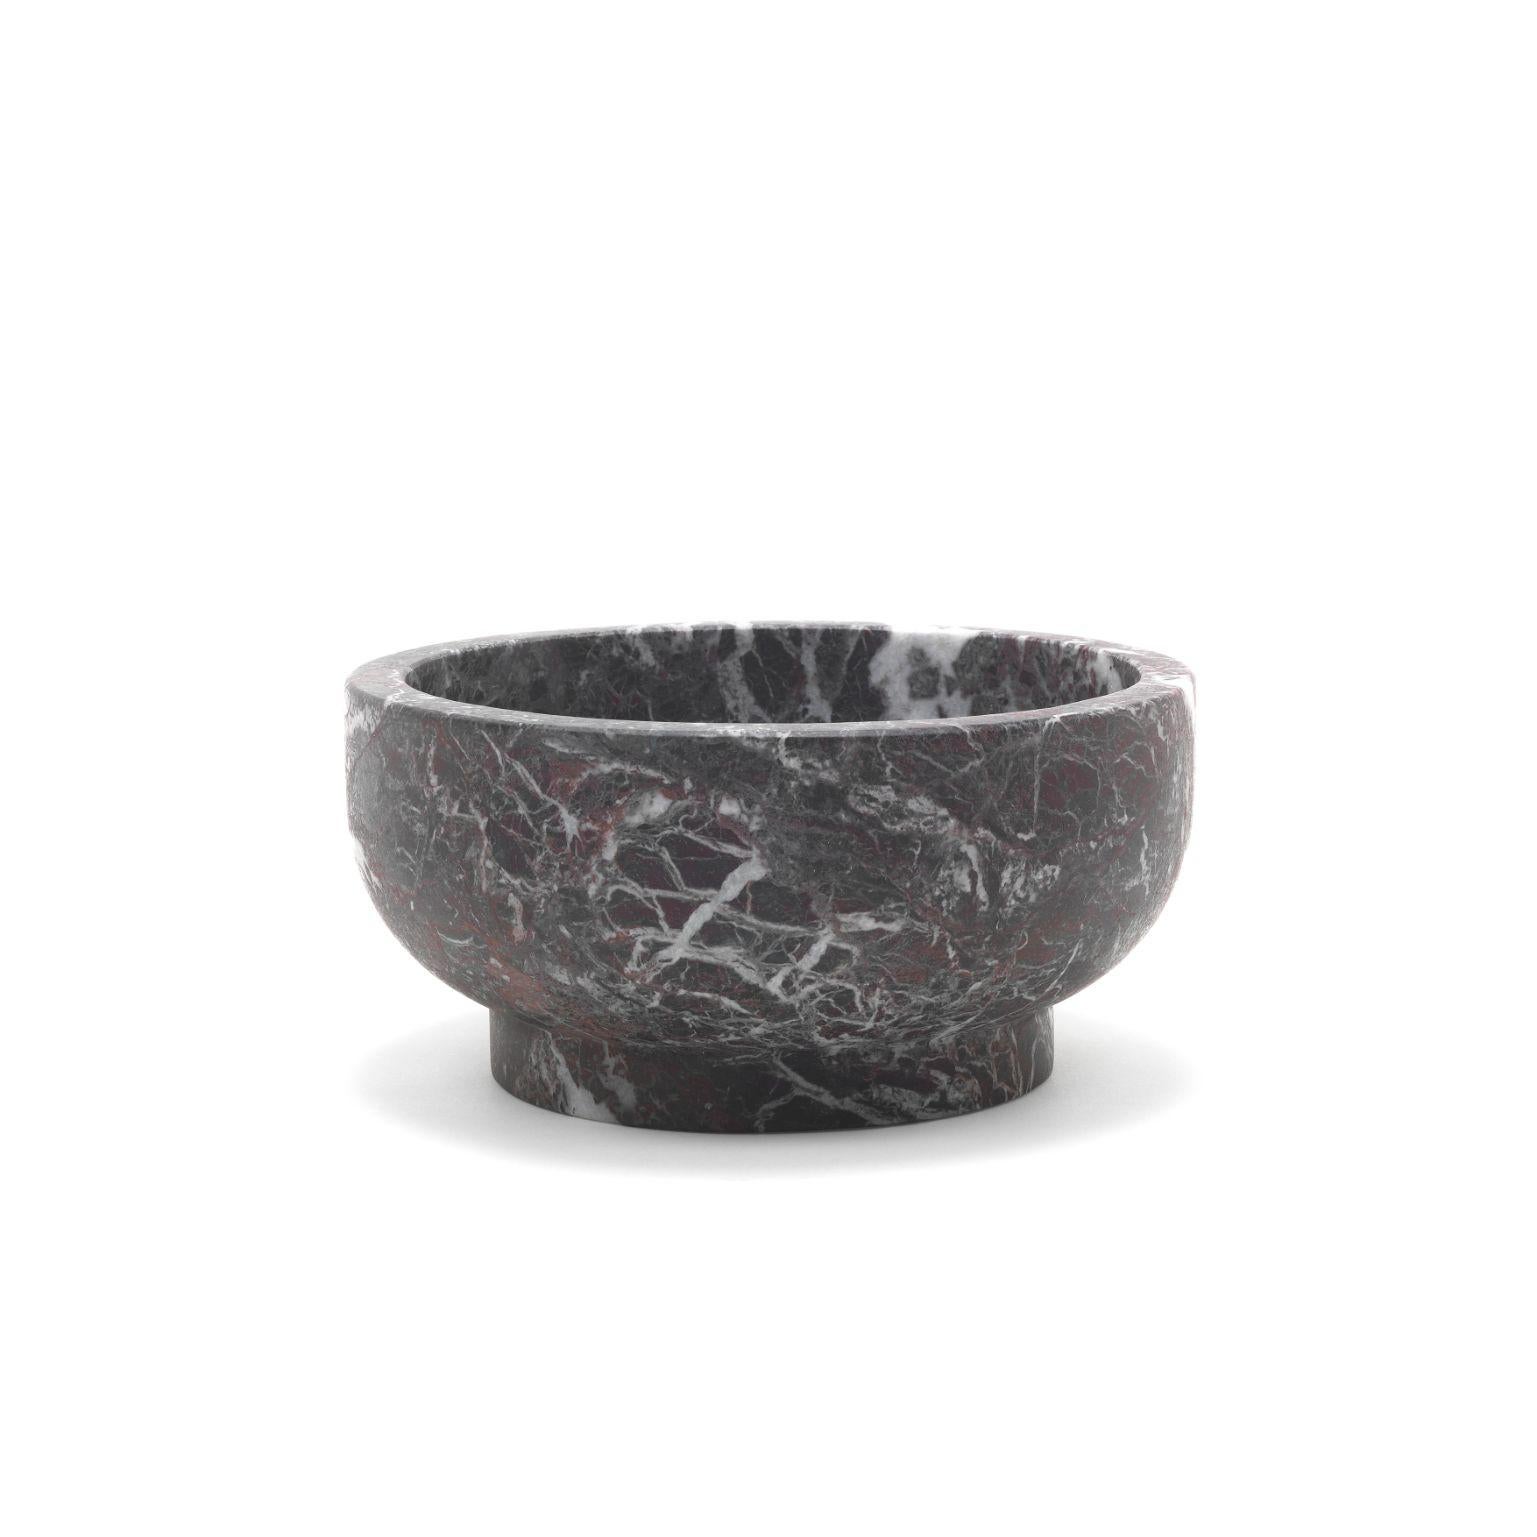 Contemporary Set of 2 Memory Bowls, Black & Red by Cristoforo Trapani For Sale